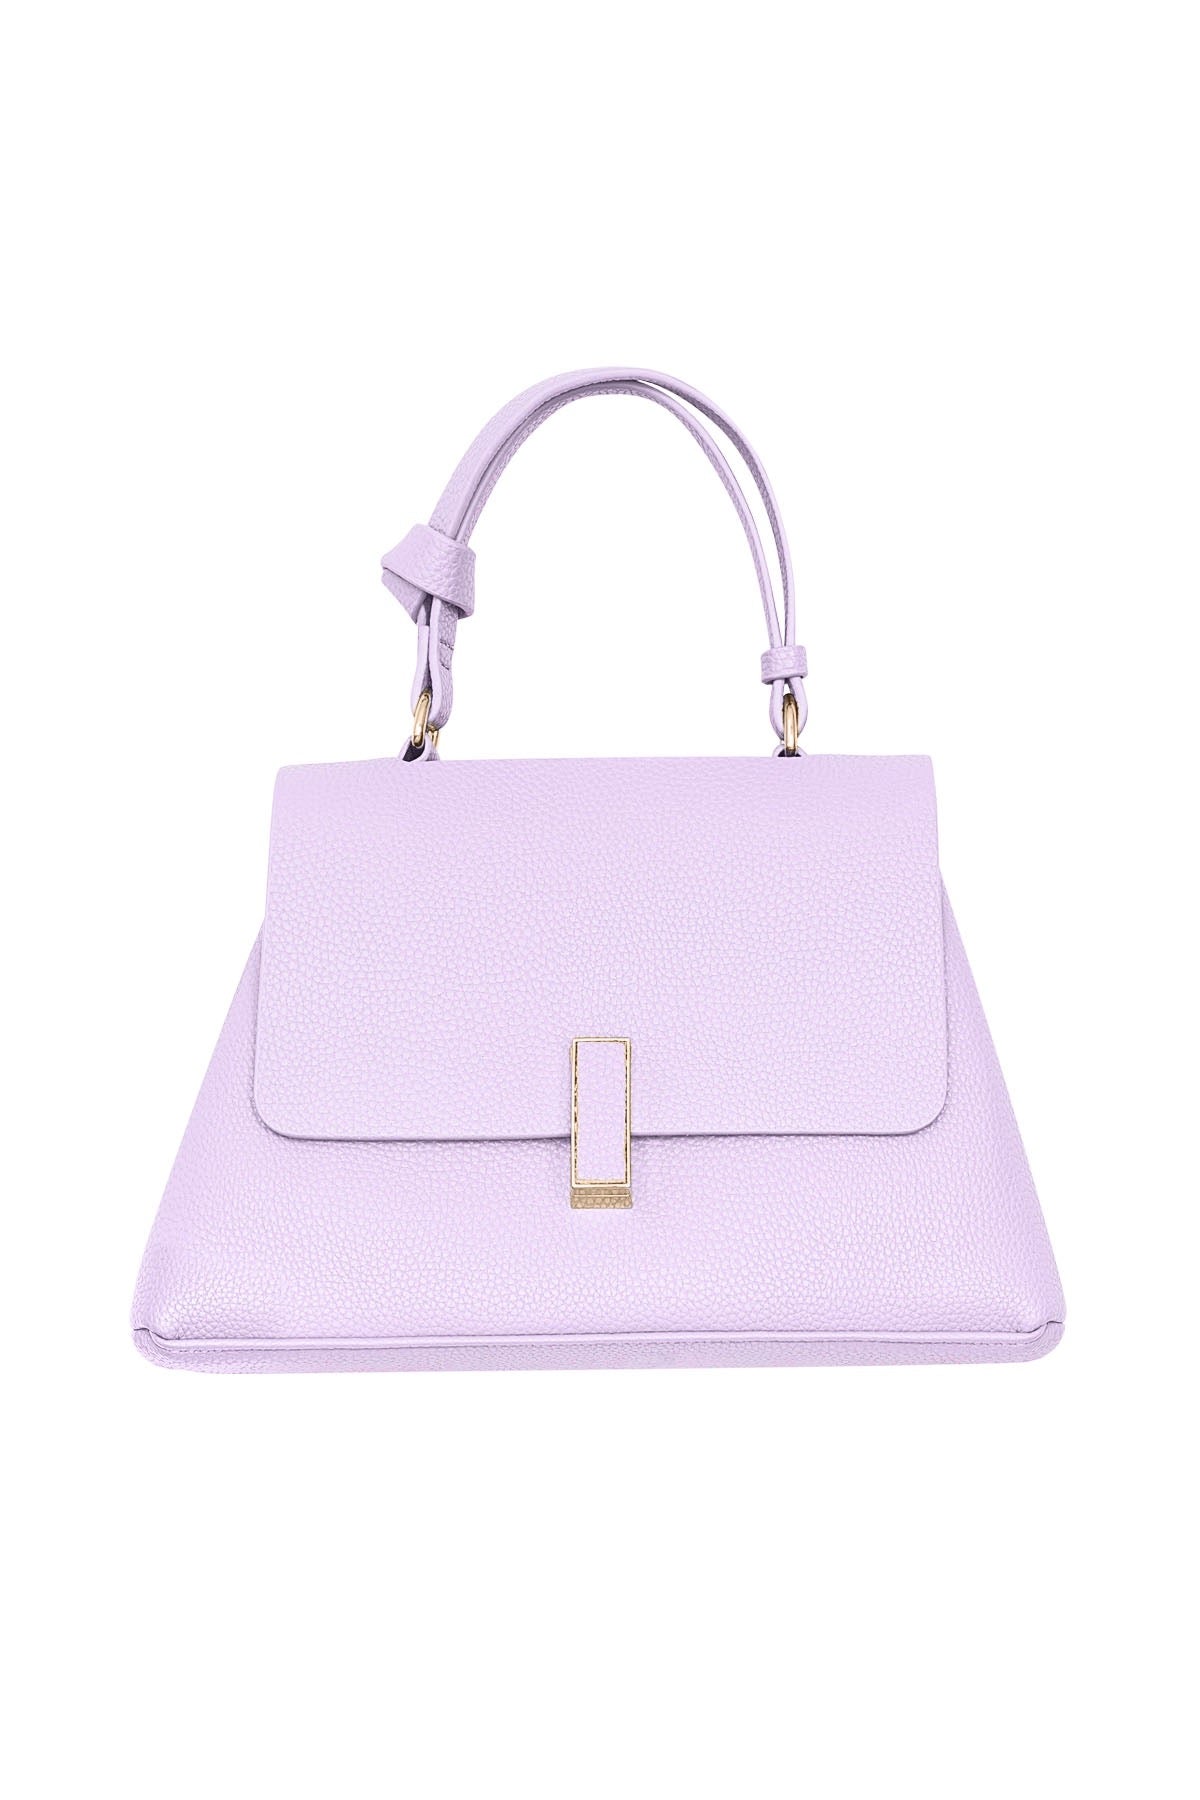 BAG MUSTHAVE LILA